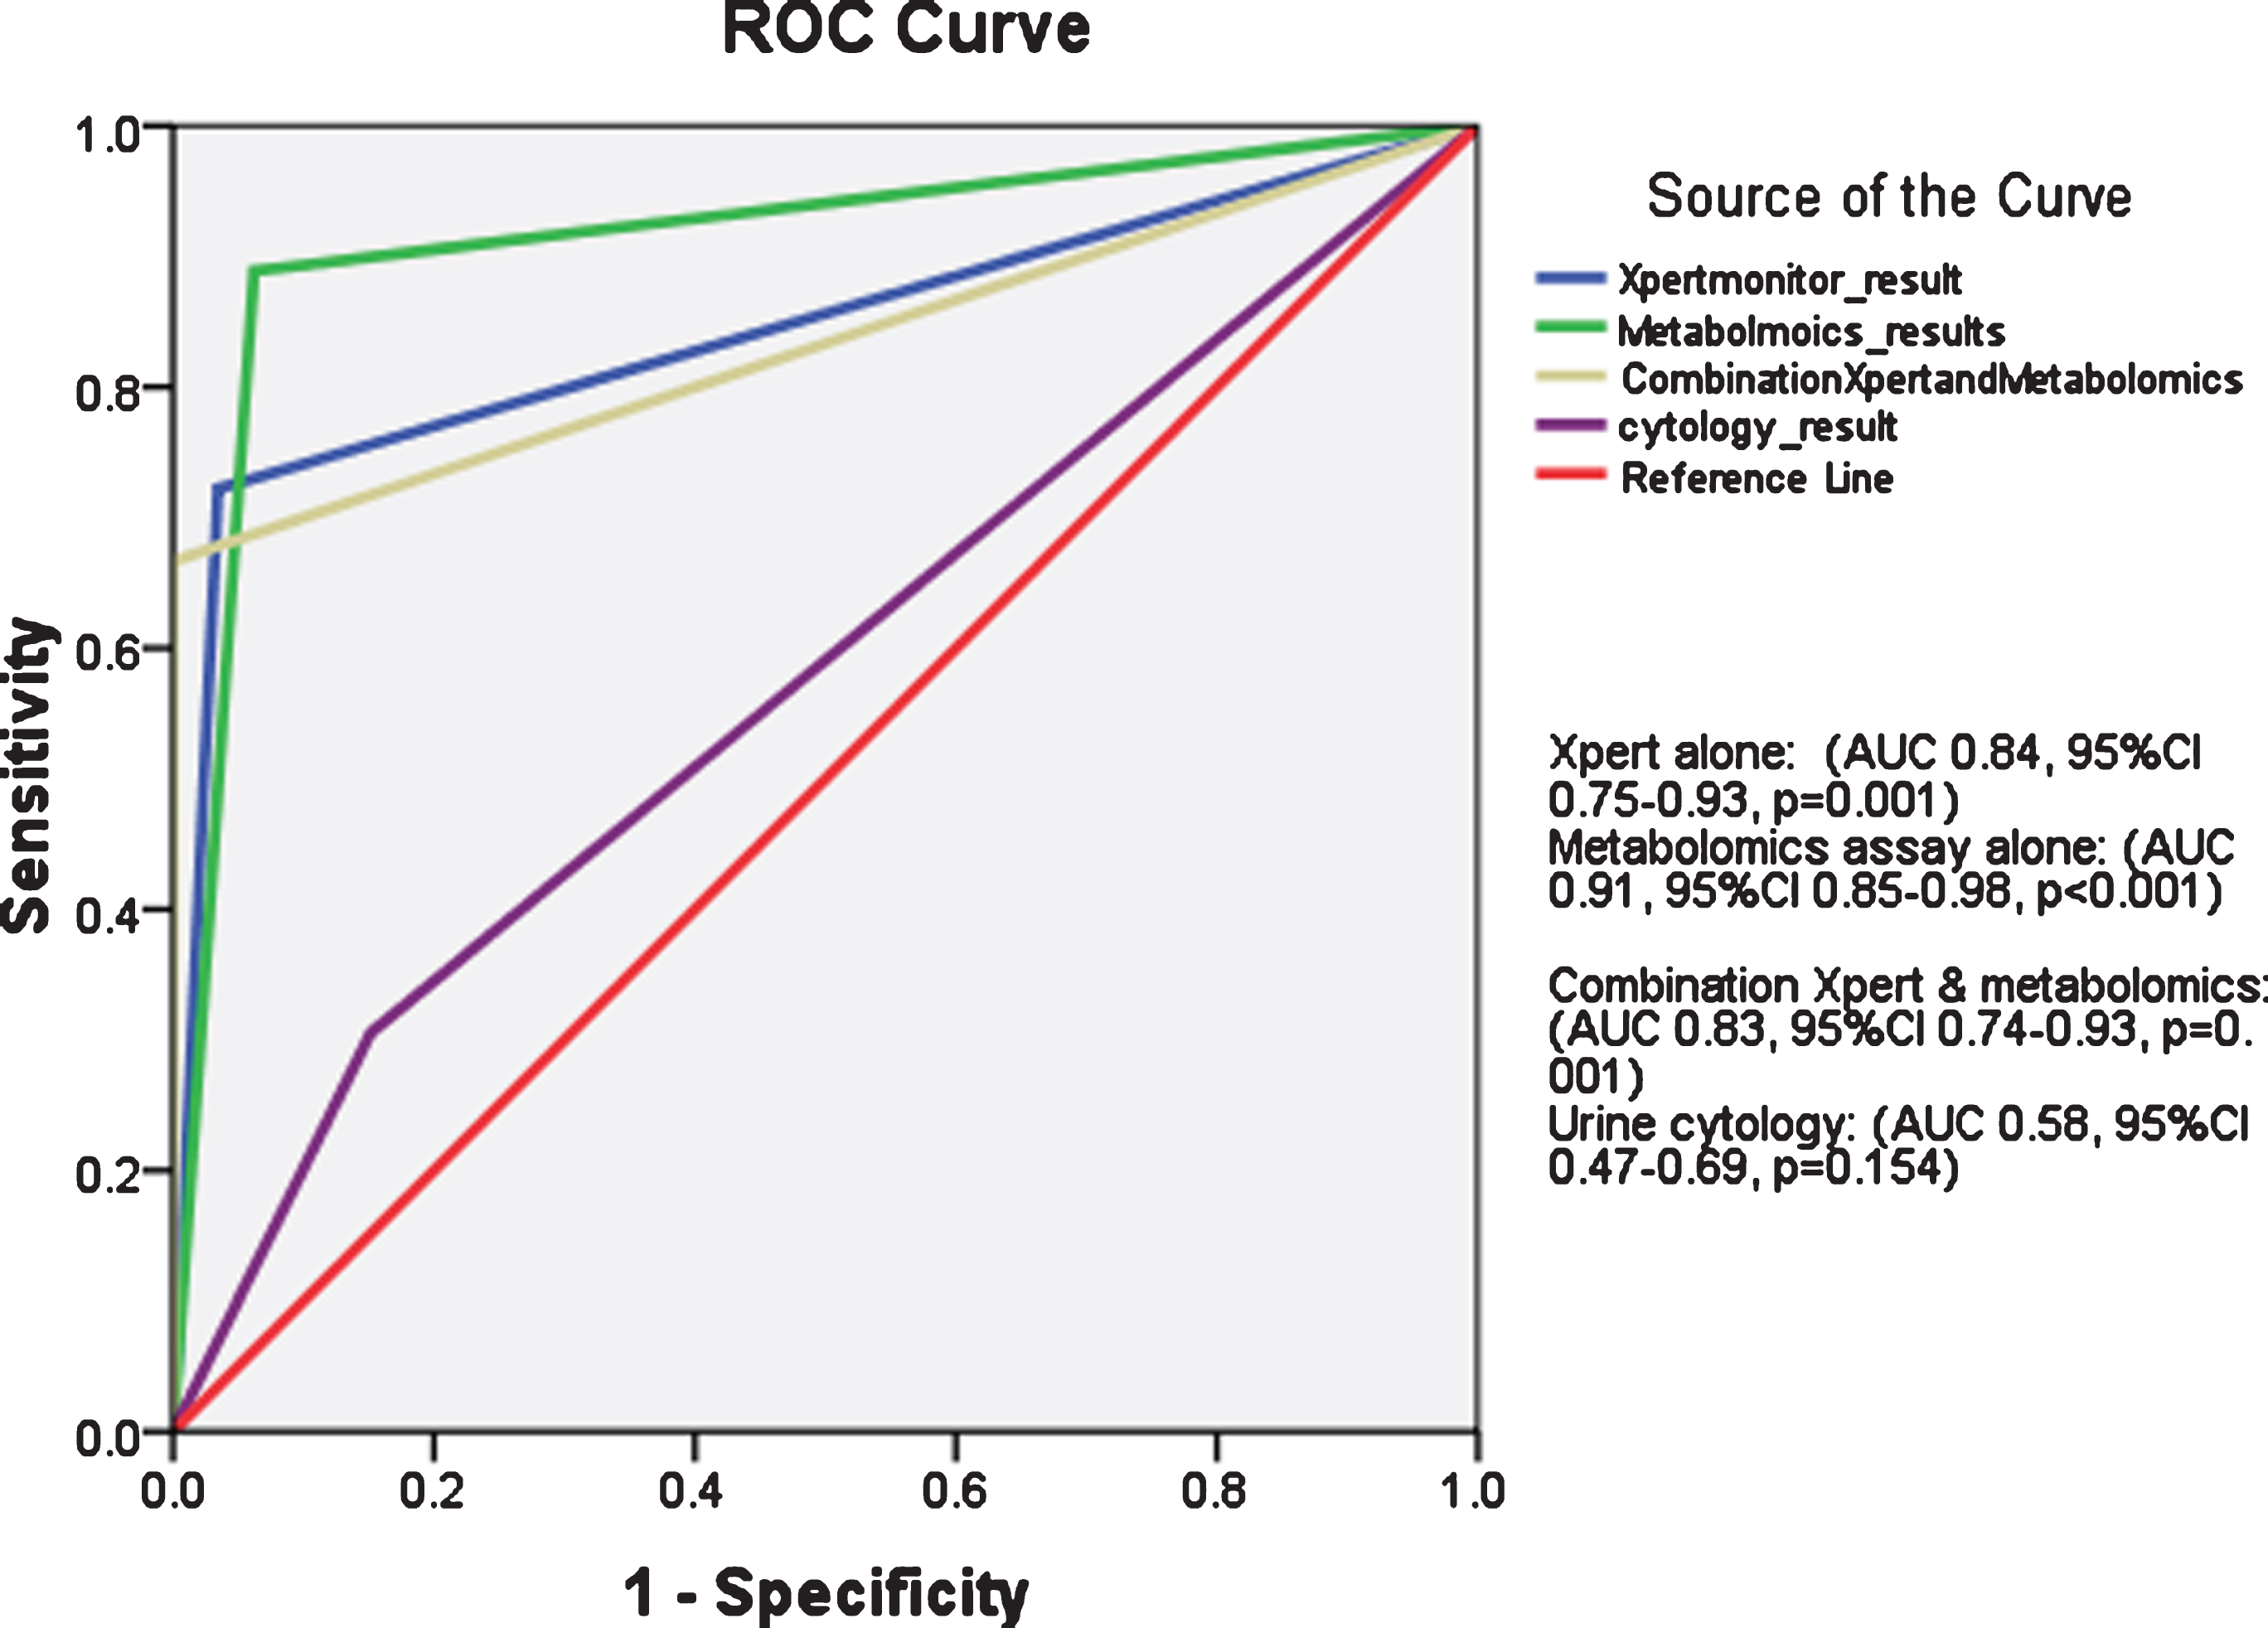 Receiver operator characteristics (ROC) curve for Xpert test alone, metabolomics assay alone, combination of both and urine cytology for bladder cancer detection in study cohort.